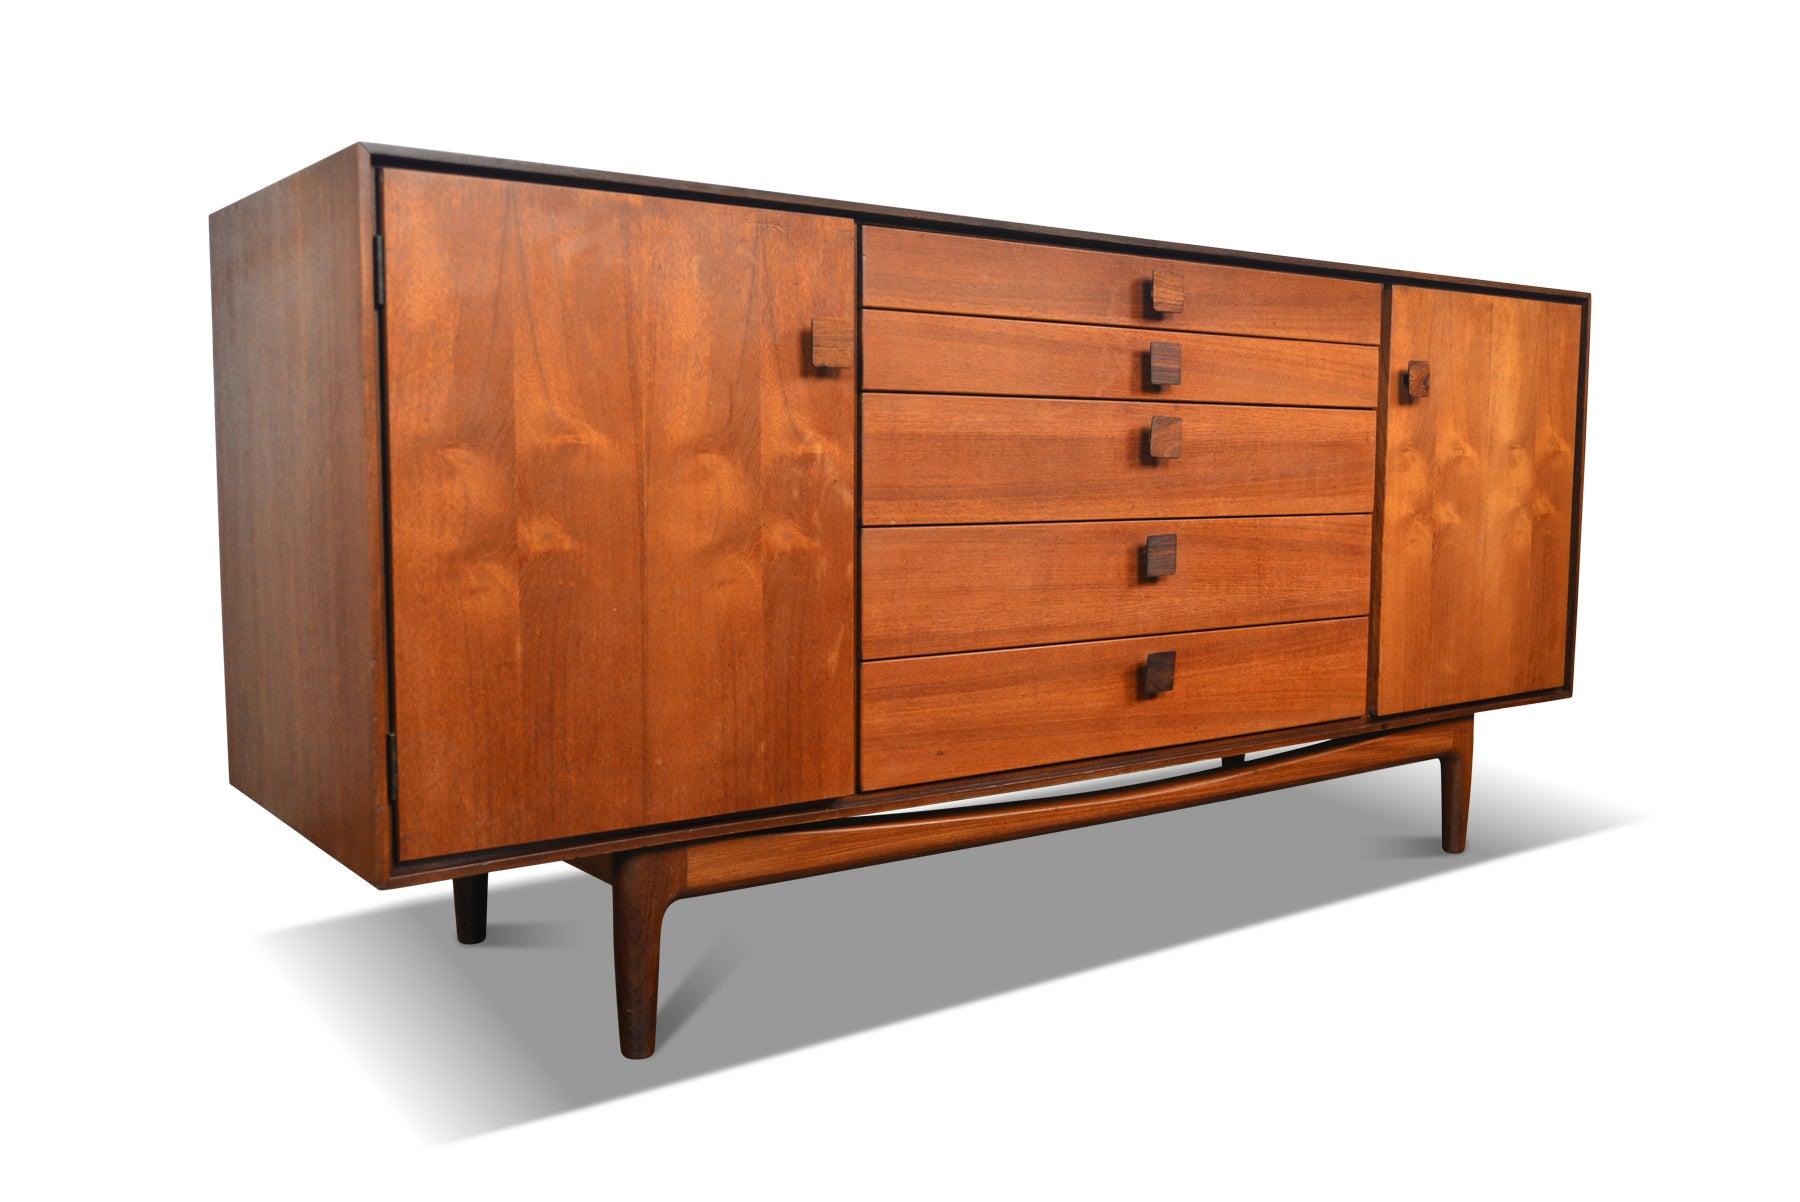 Origin: England
Designer: Ib Kofod Larsen
Manufacturer: G Plan
Era: 1961
Materials: teak, rosewood, Afromosia.
Measurements: 66? wide x 19? deep x 30? tall.

Condition: In excellent original condition with typical wear for its vintage. Price